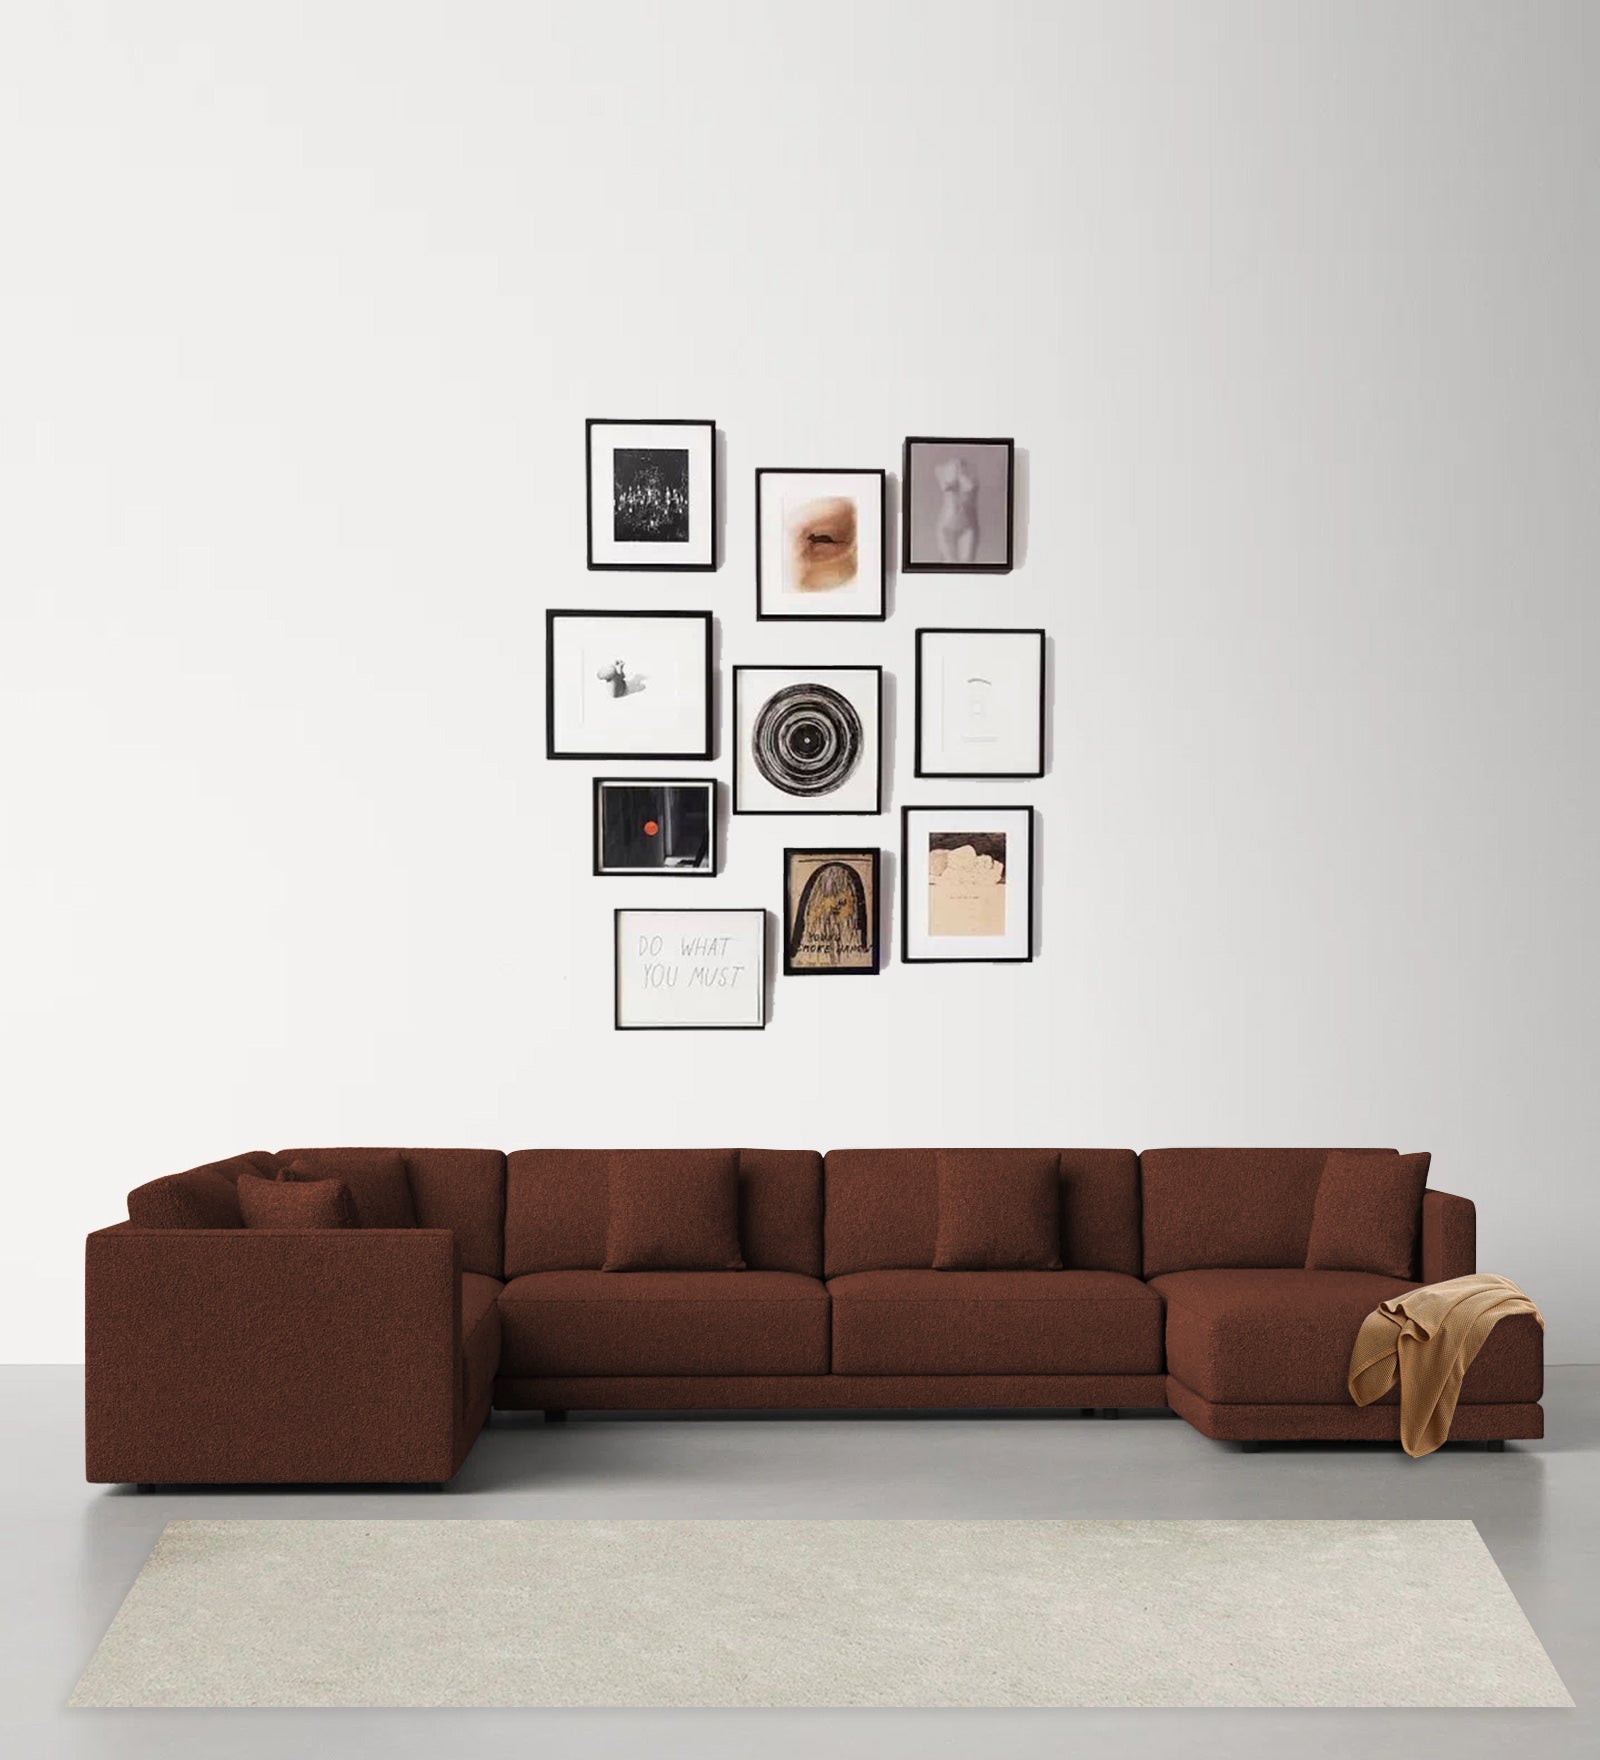 Carlin Fabric LHS 8 Seater Sectional Sofa In Coffee Brown Colour